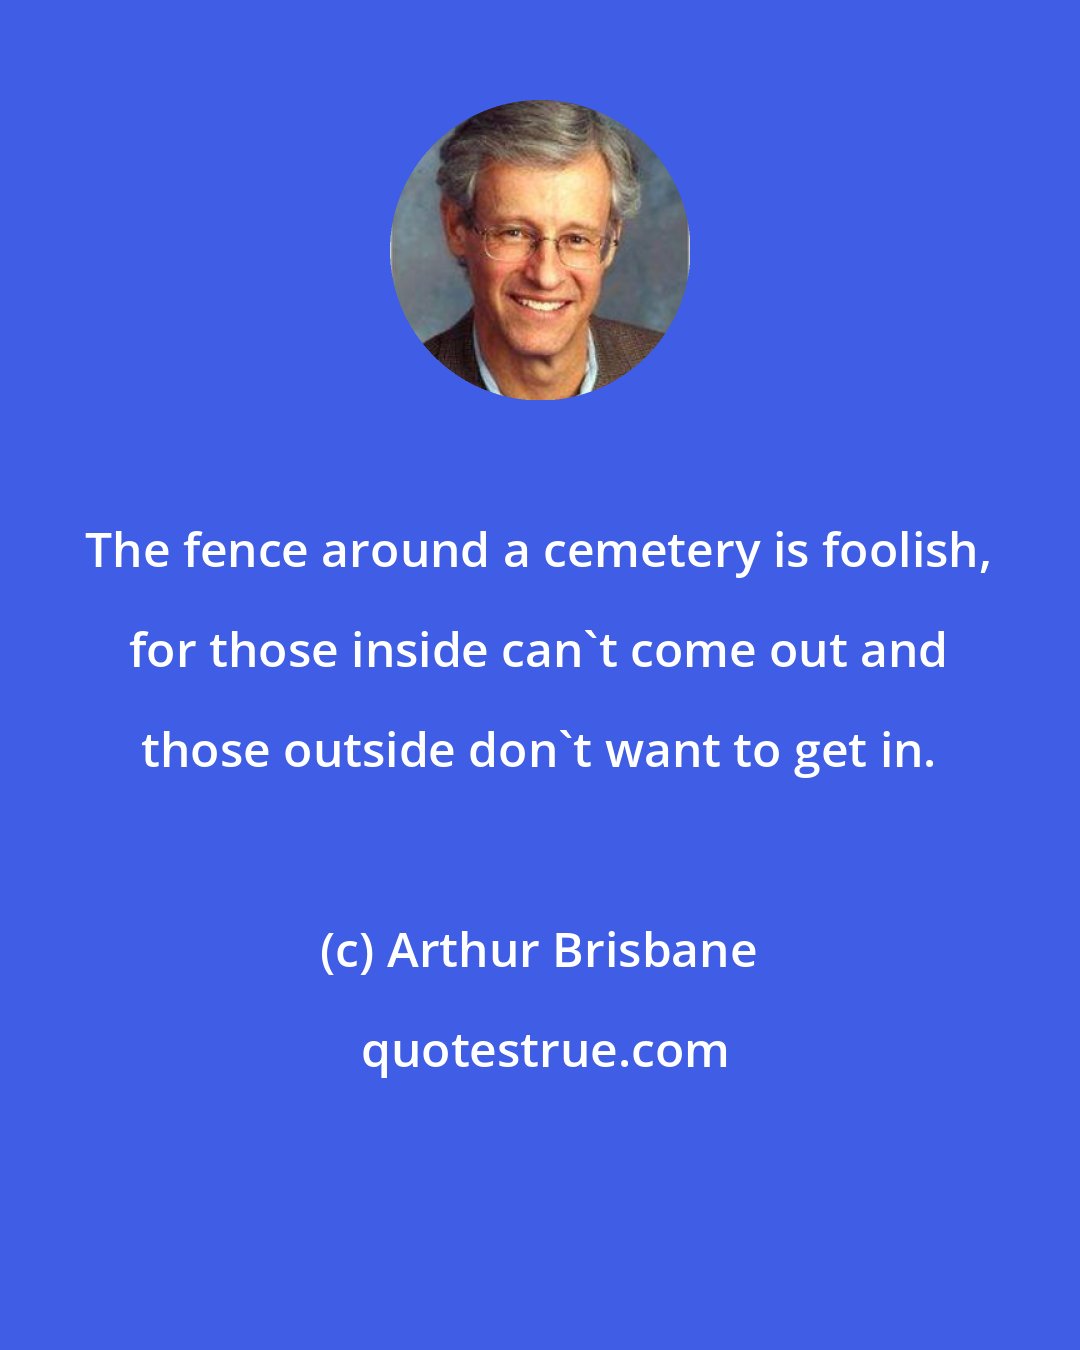 Arthur Brisbane: The fence around a cemetery is foolish, for those inside can't come out and those outside don't want to get in.